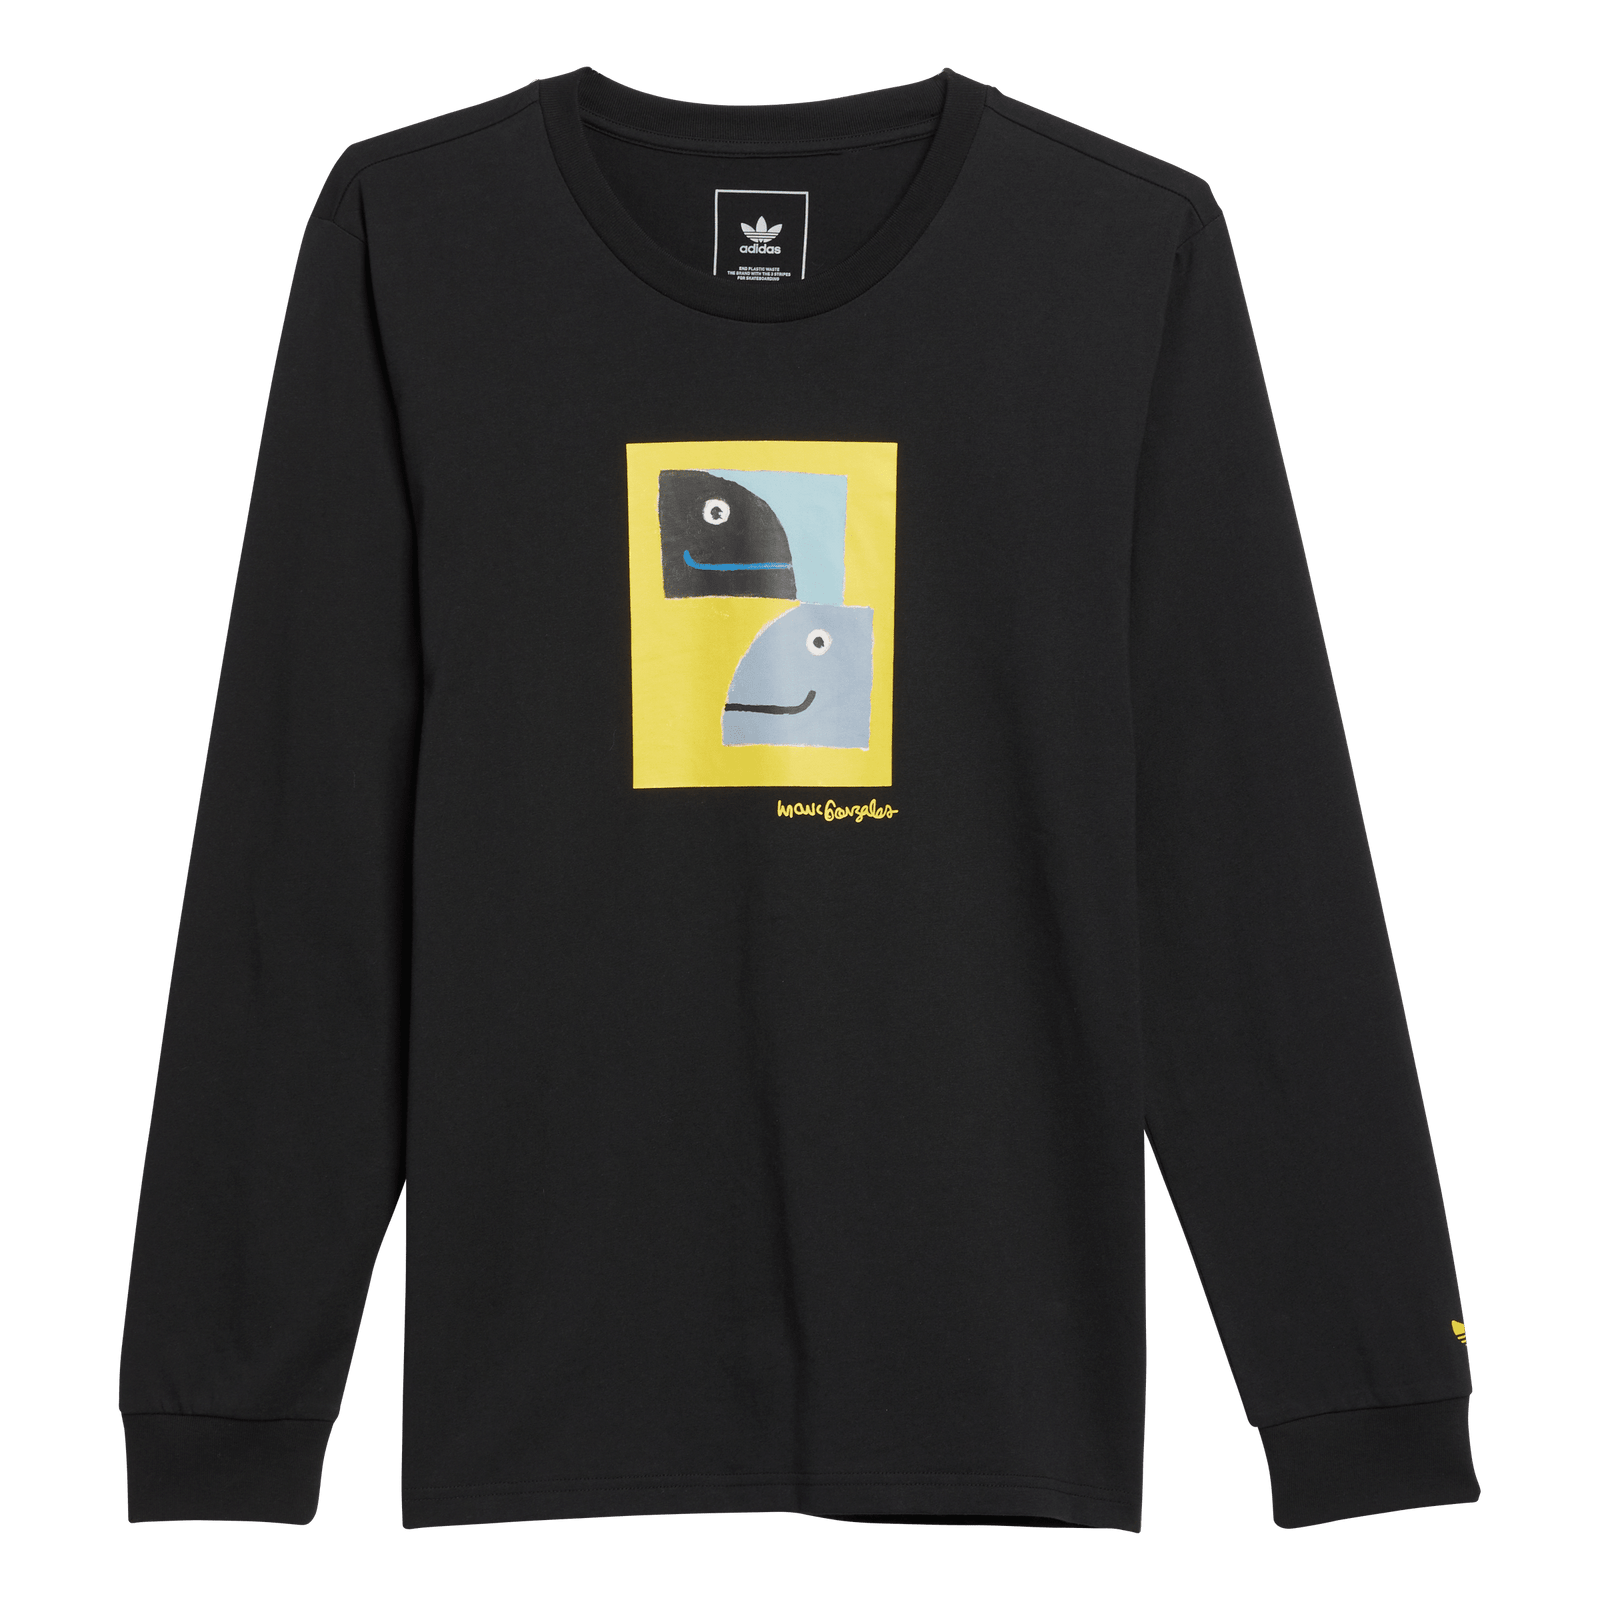 Buy Men's Long Sleeve T-Shirts online in Canada at Freeride 